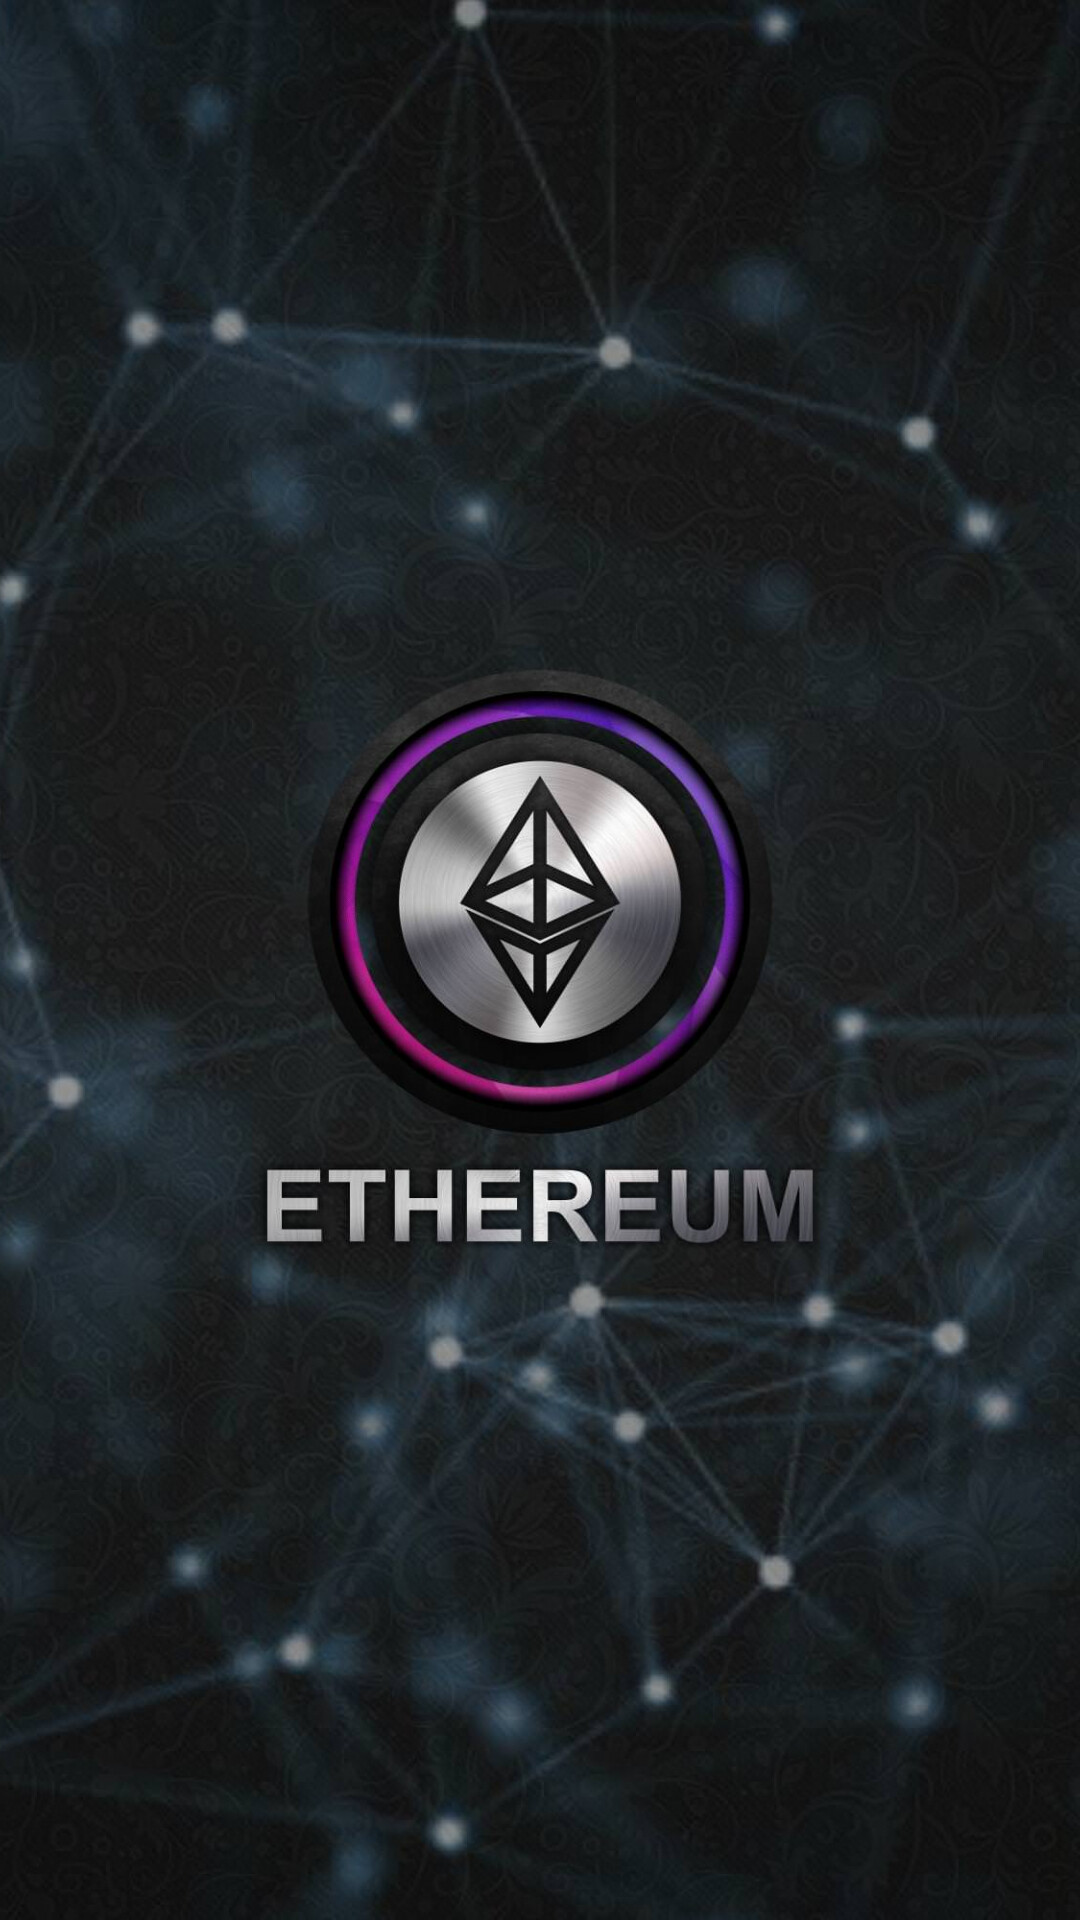 Cryptocurrency: Ethereum, An open source, distributed software platform based on blockchain technology. 1080x1920 Full HD Background.